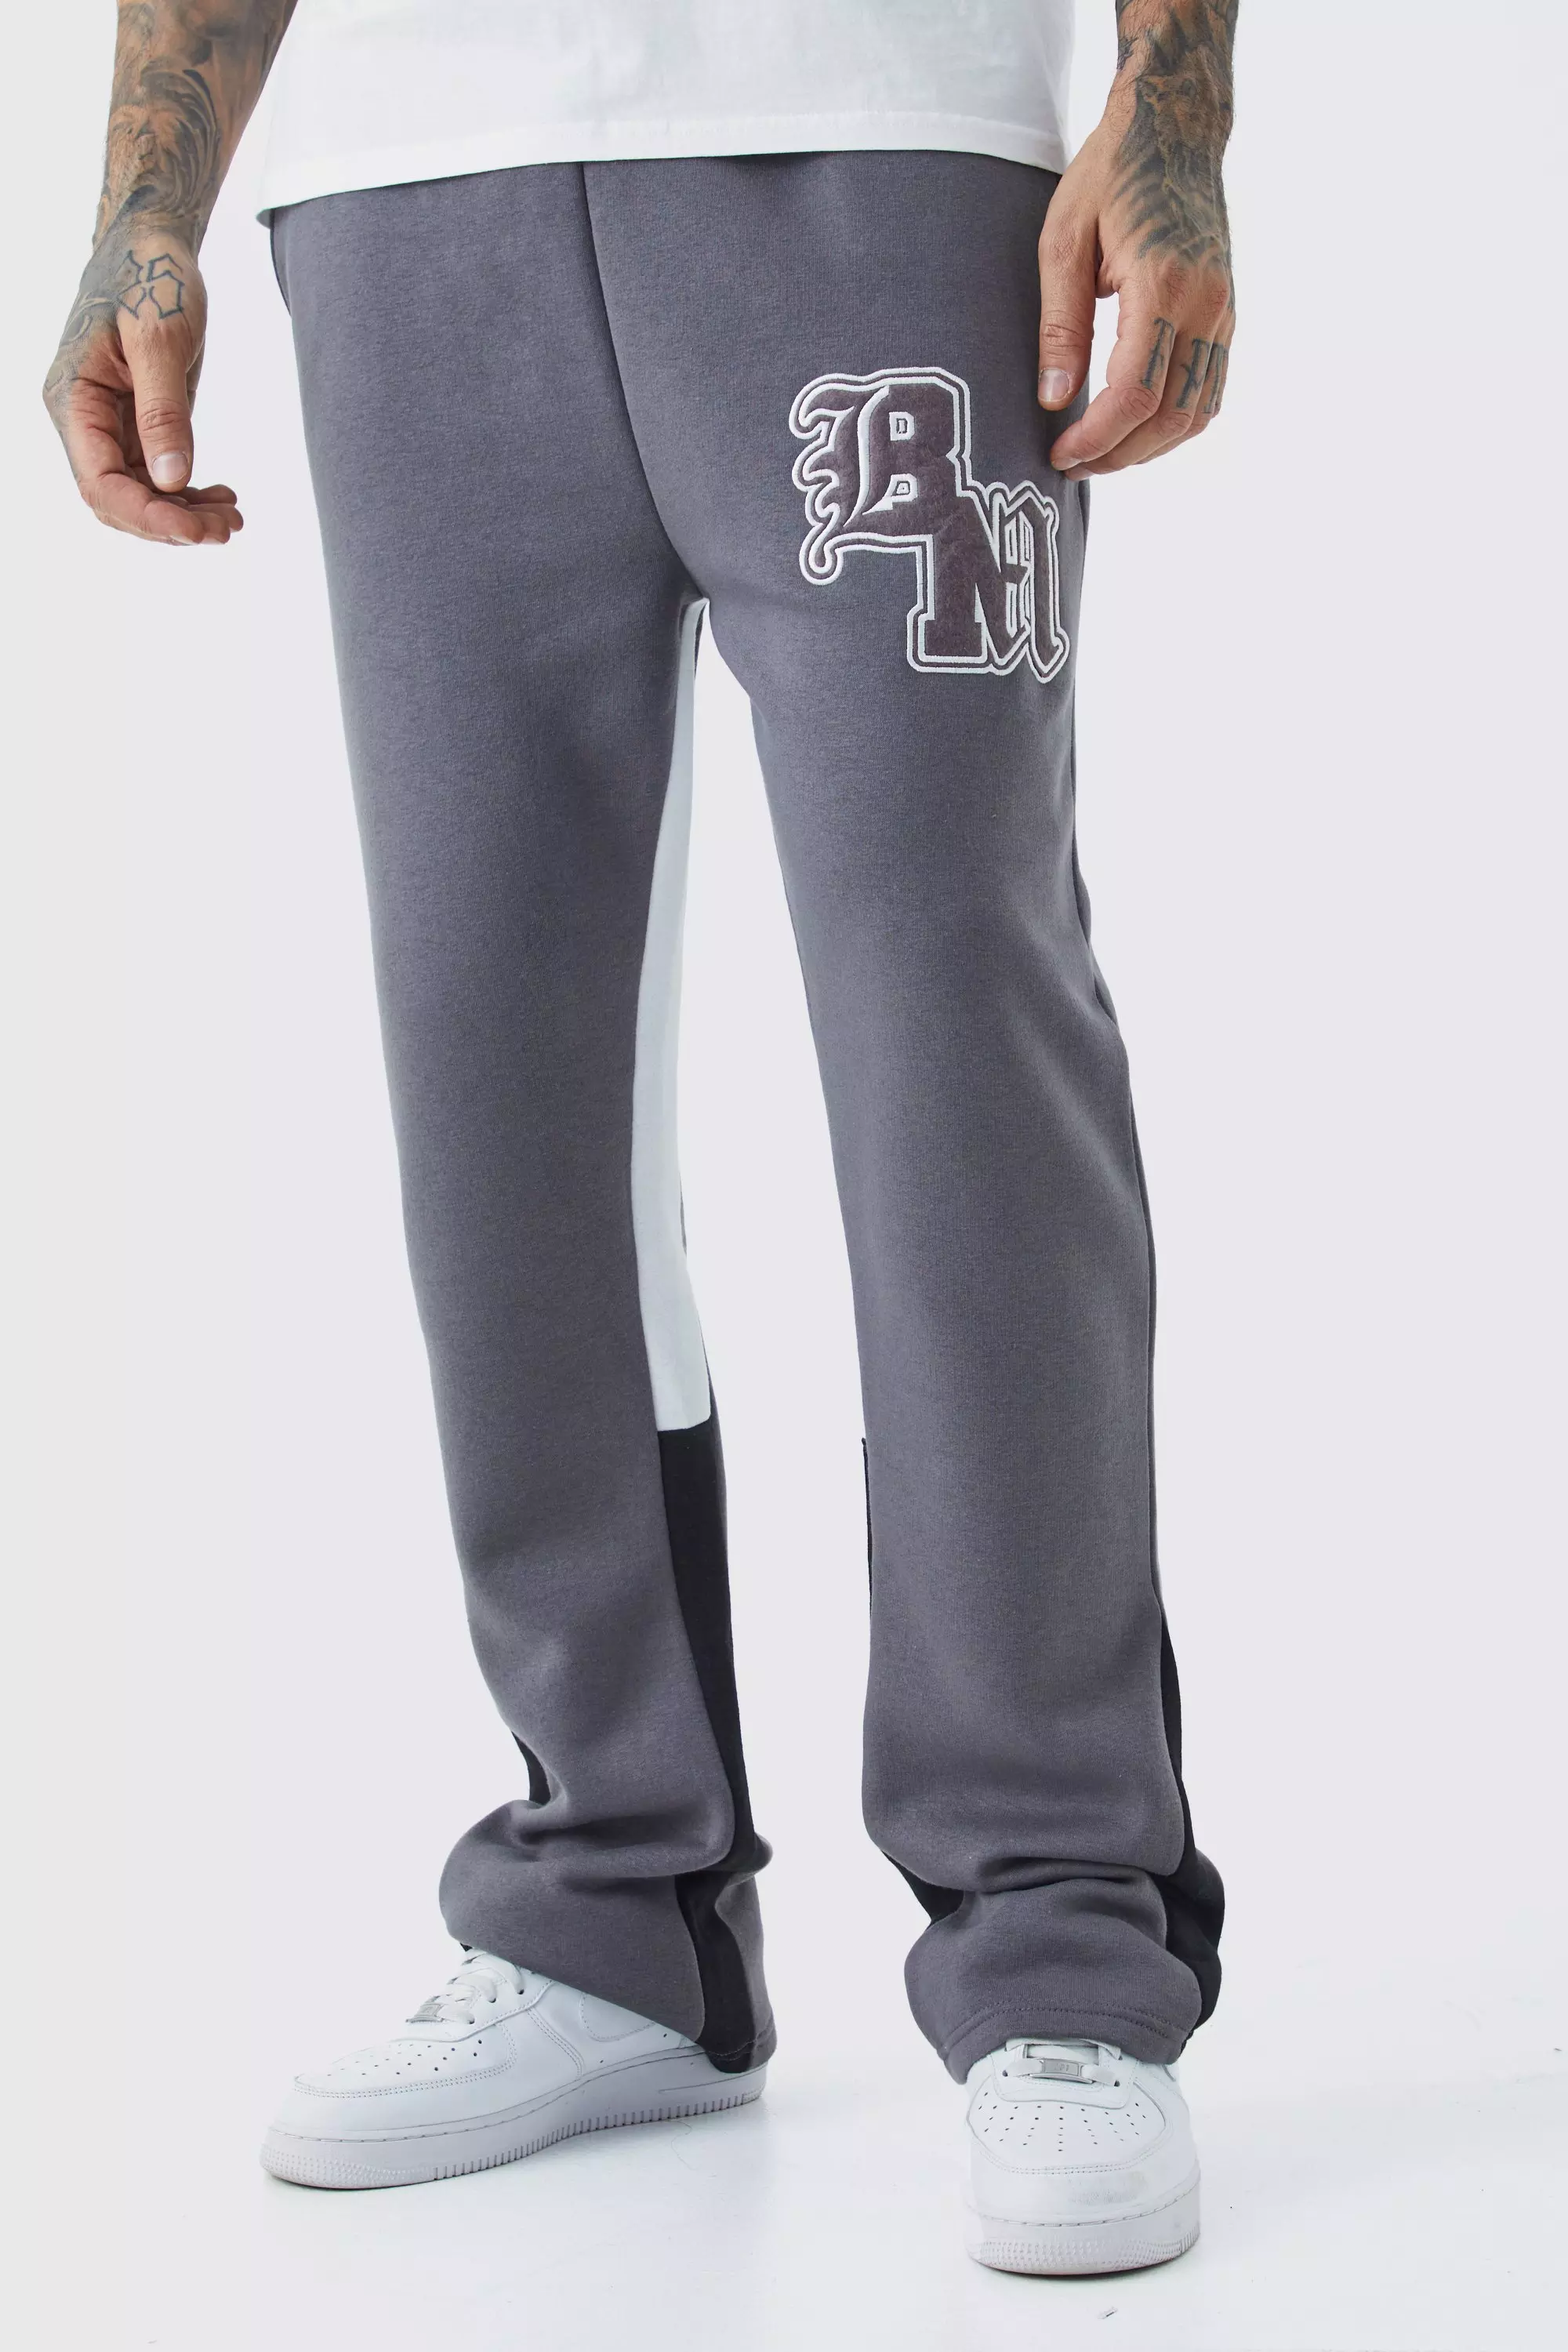 Tall Bm Contrast Gusset Jogger Charcoal